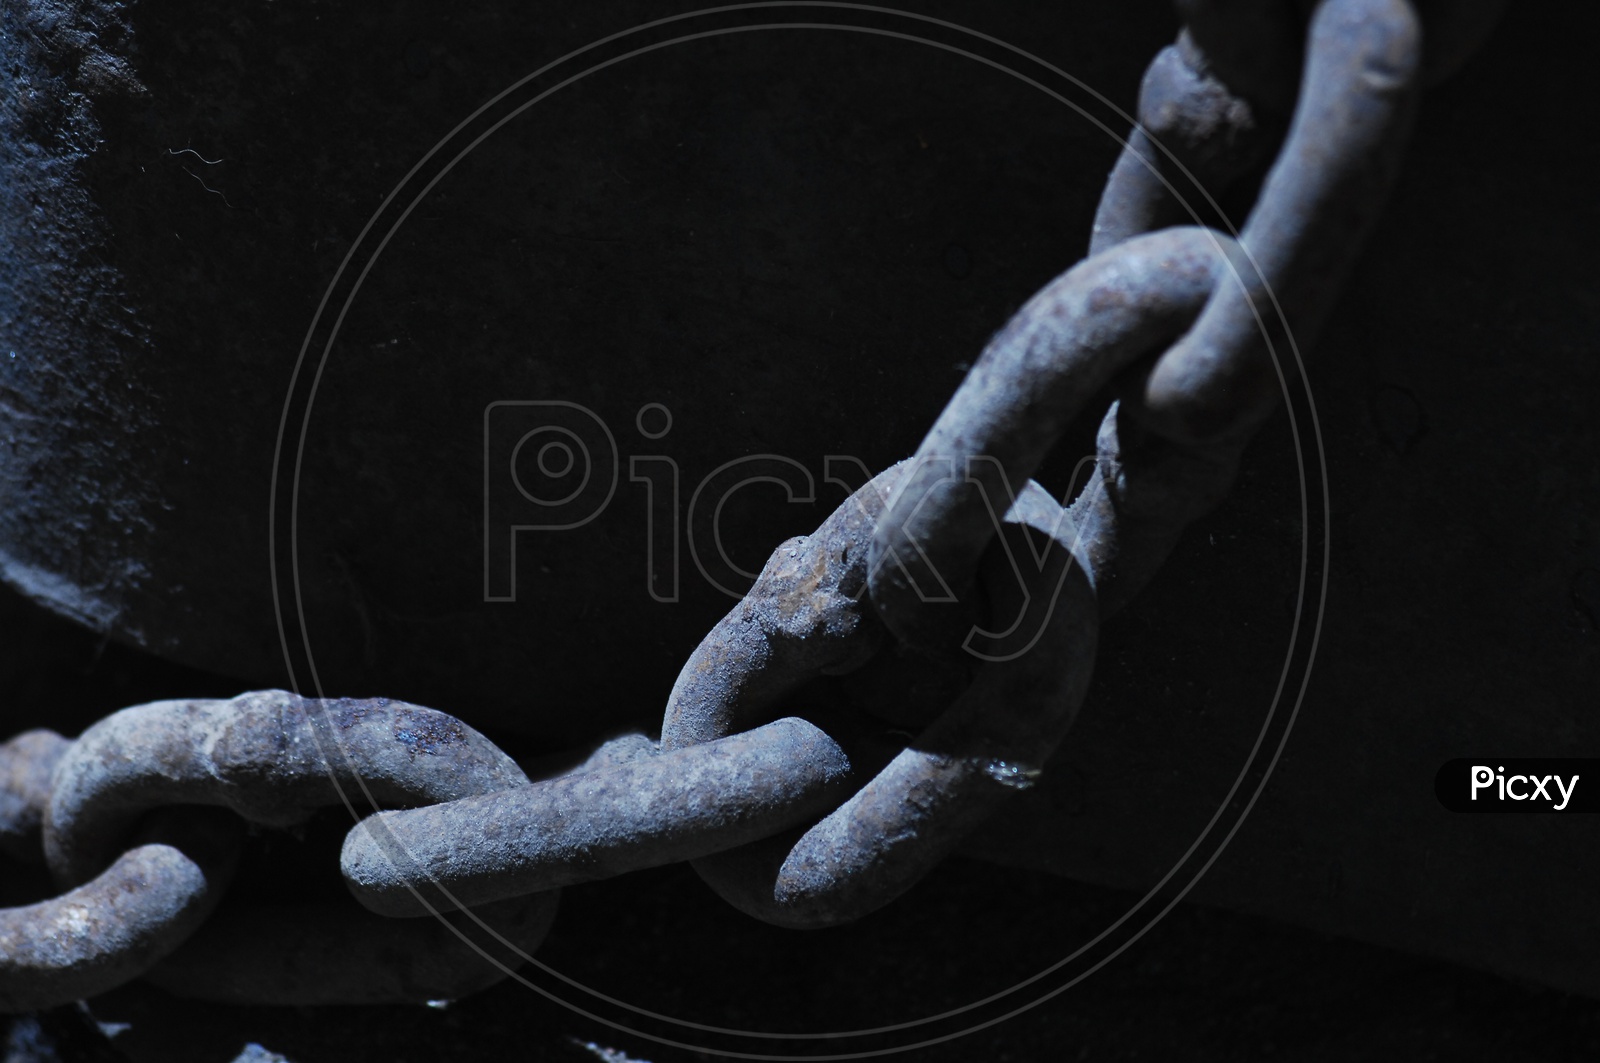 Image of Cast Iron Chain With Links-AV929184-Picxy